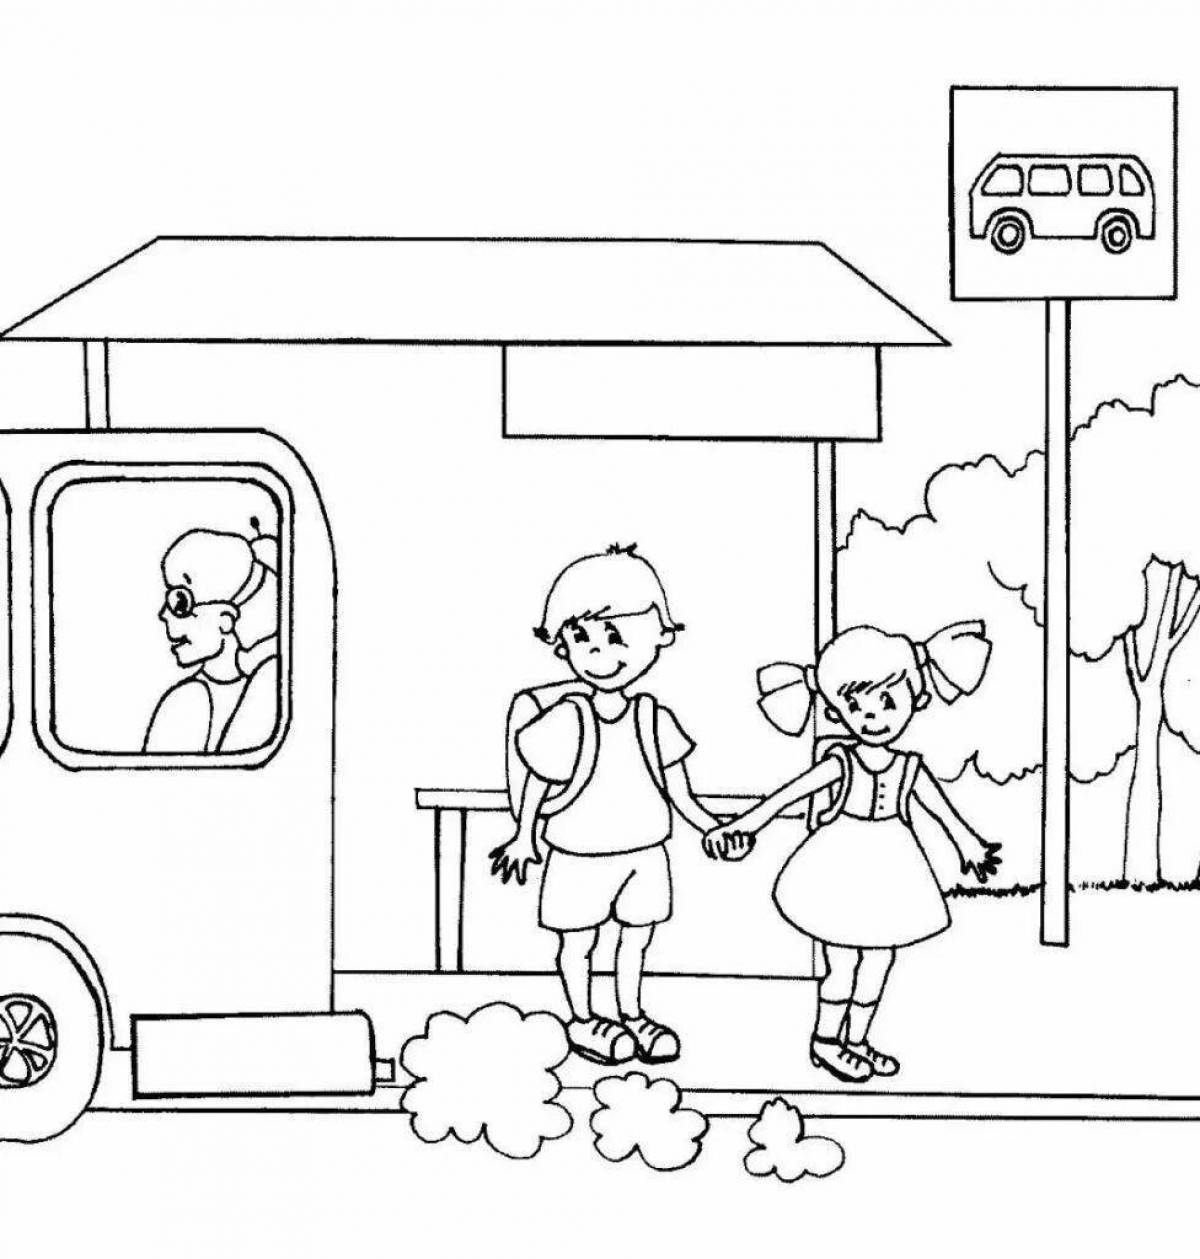 Informative coloring book traffic rules for schoolchildren